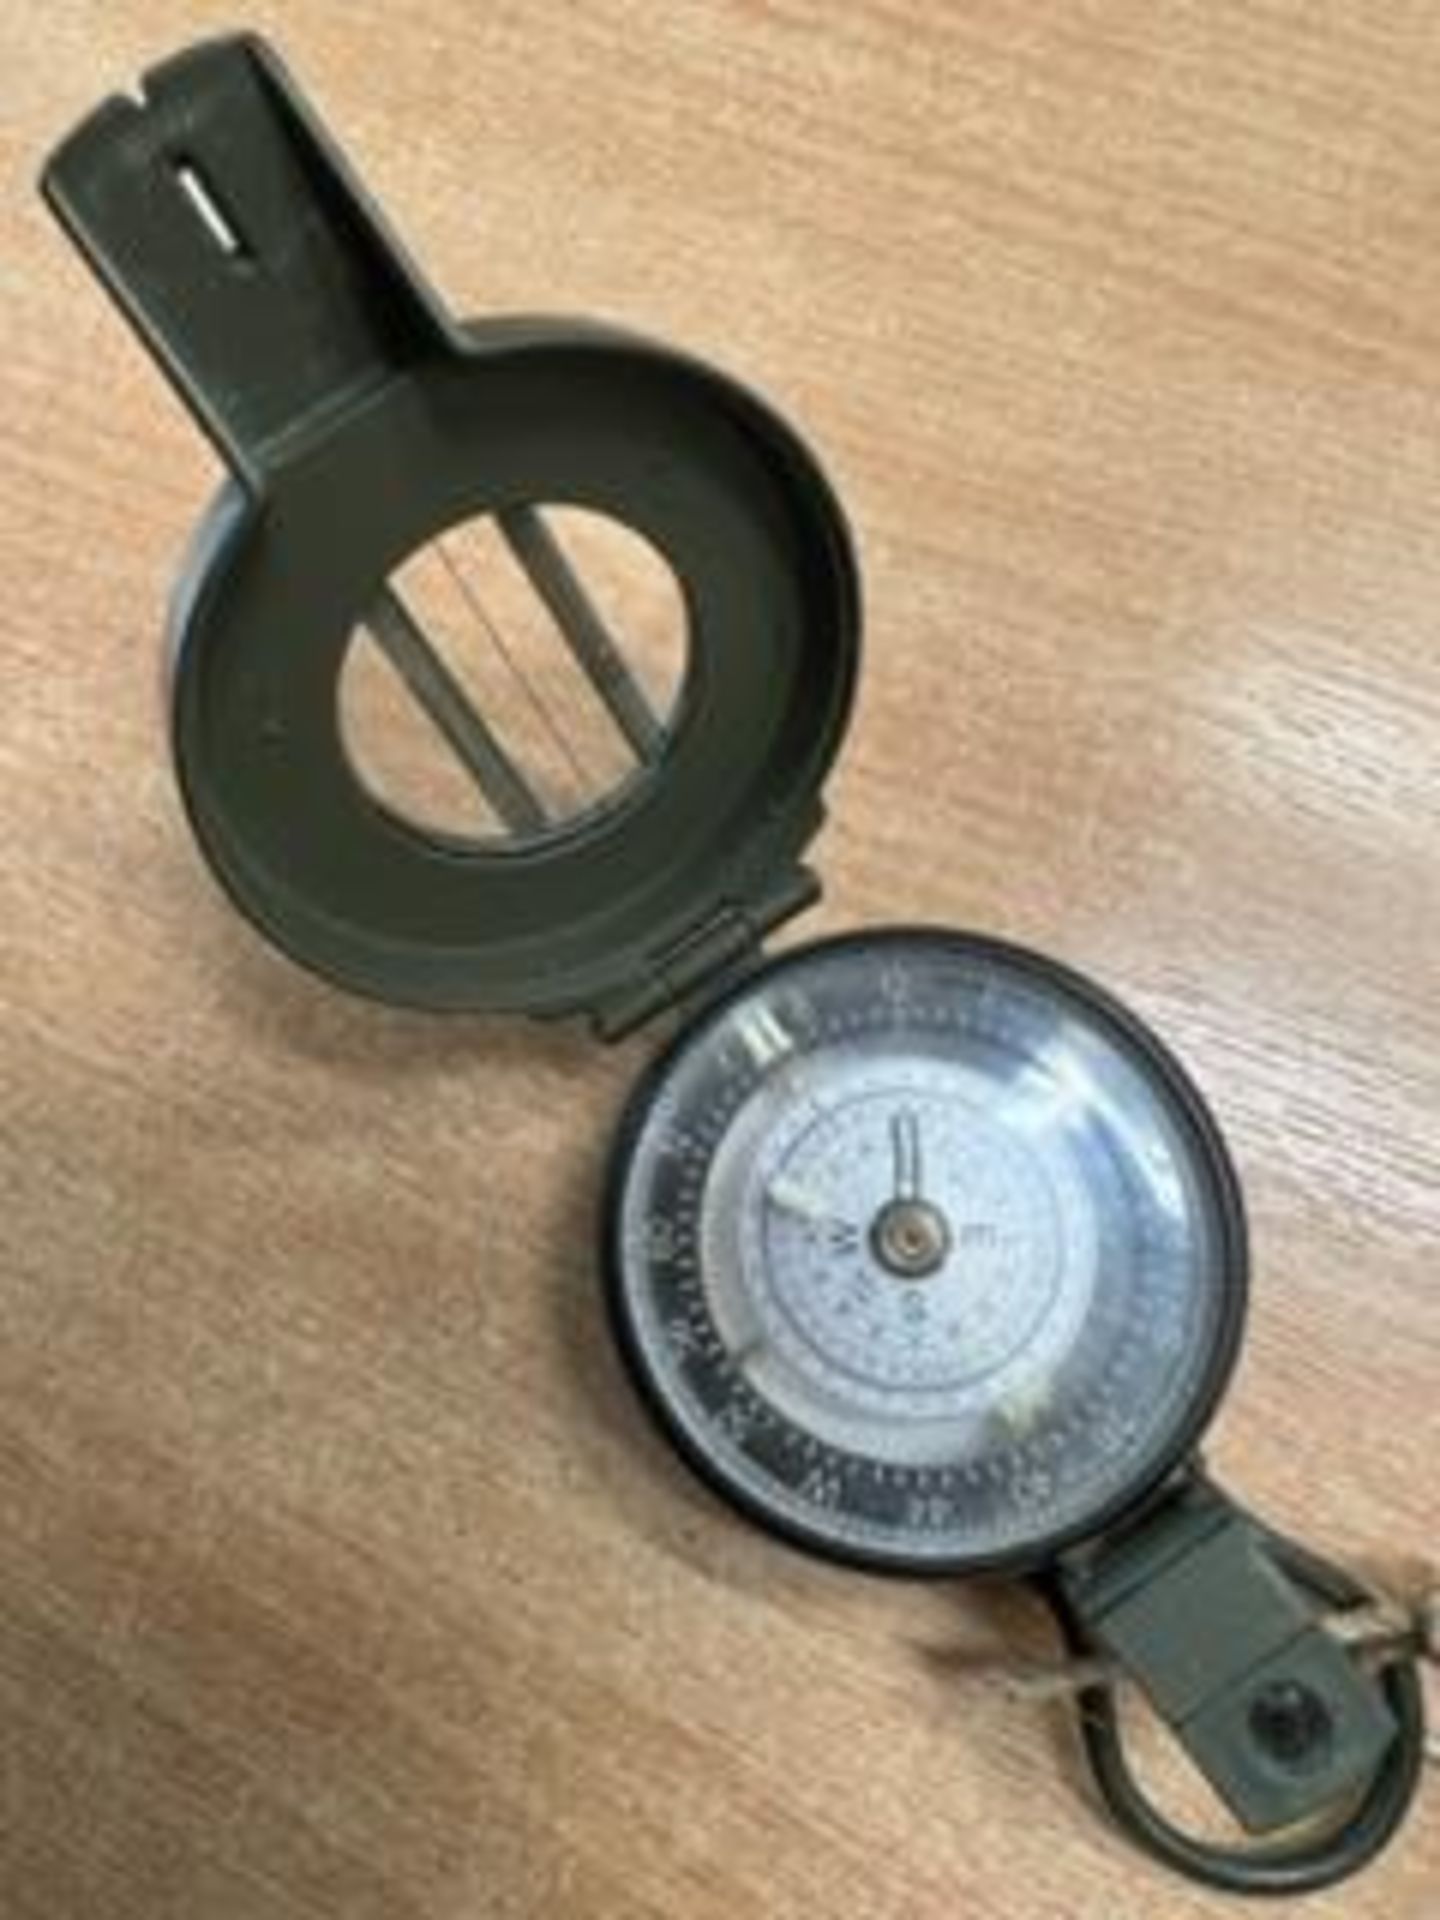 FRANCIS BAKER M88 BRITISH ARMY PRISMATIC COMPASS IN MILS NATO MARKS - Image 2 of 7